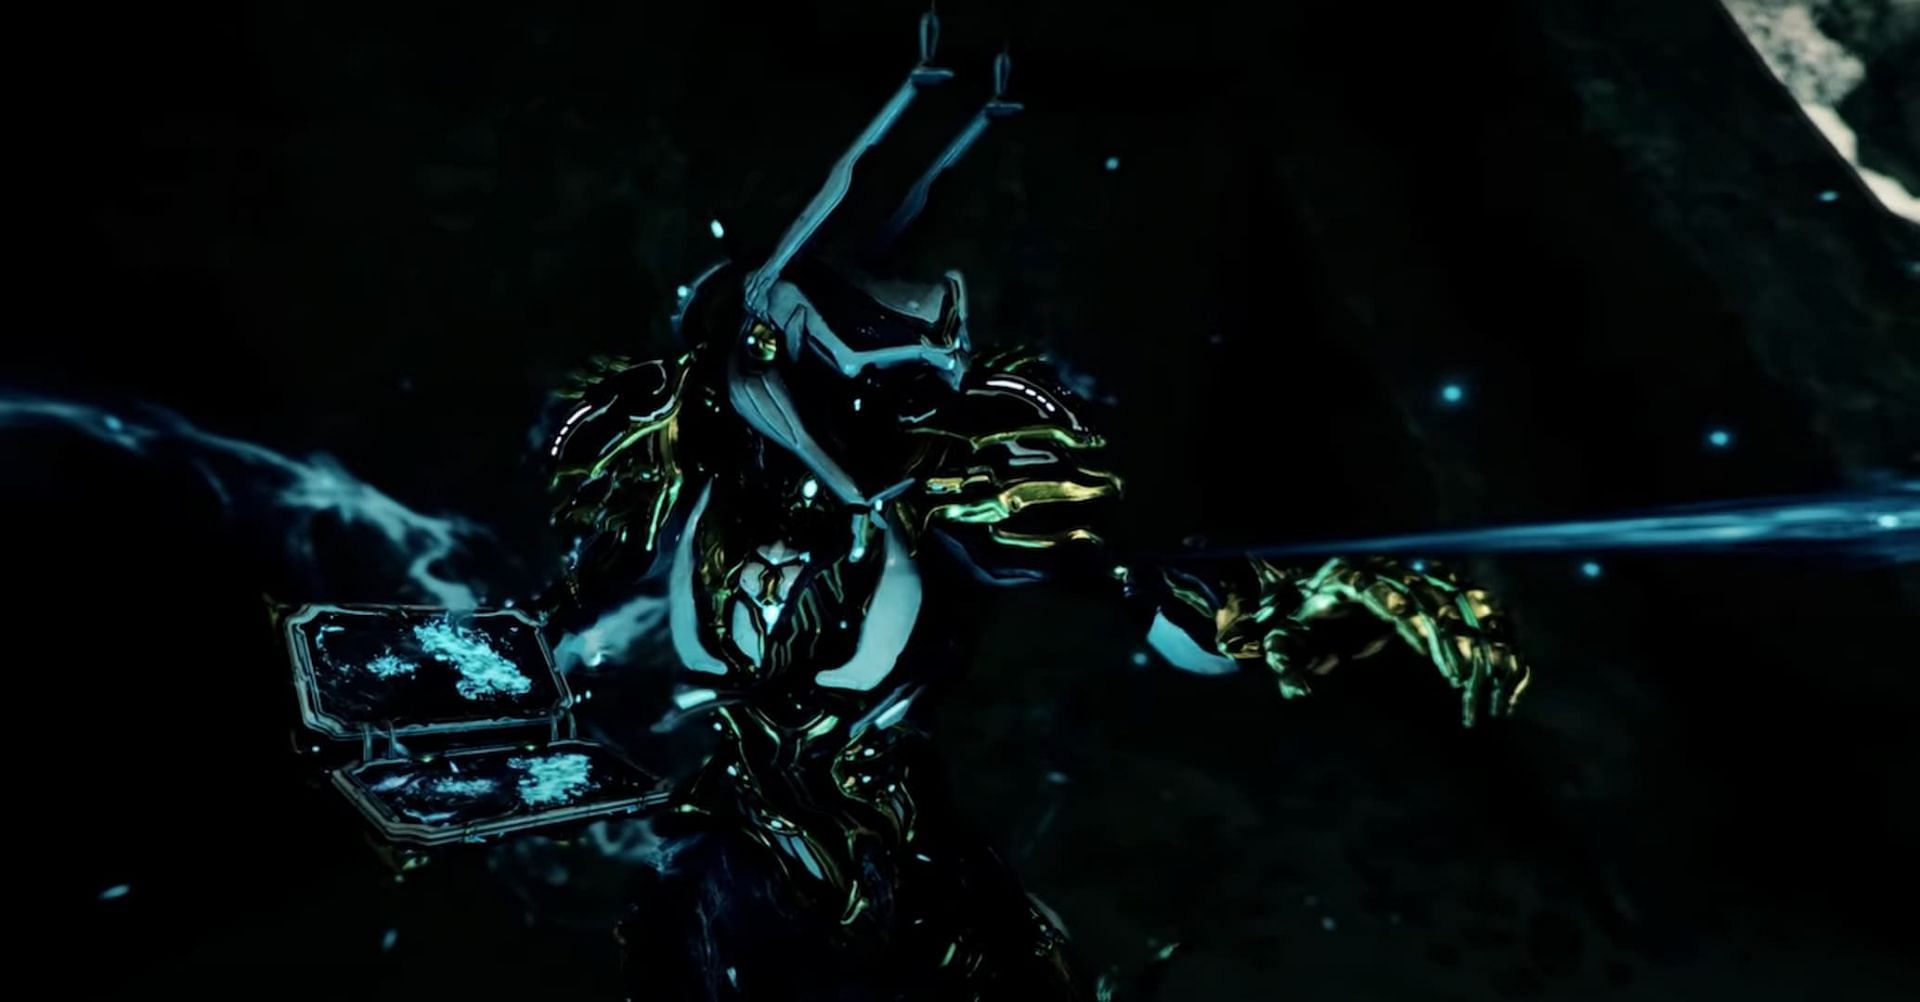 Grimoire is the first of Warframe